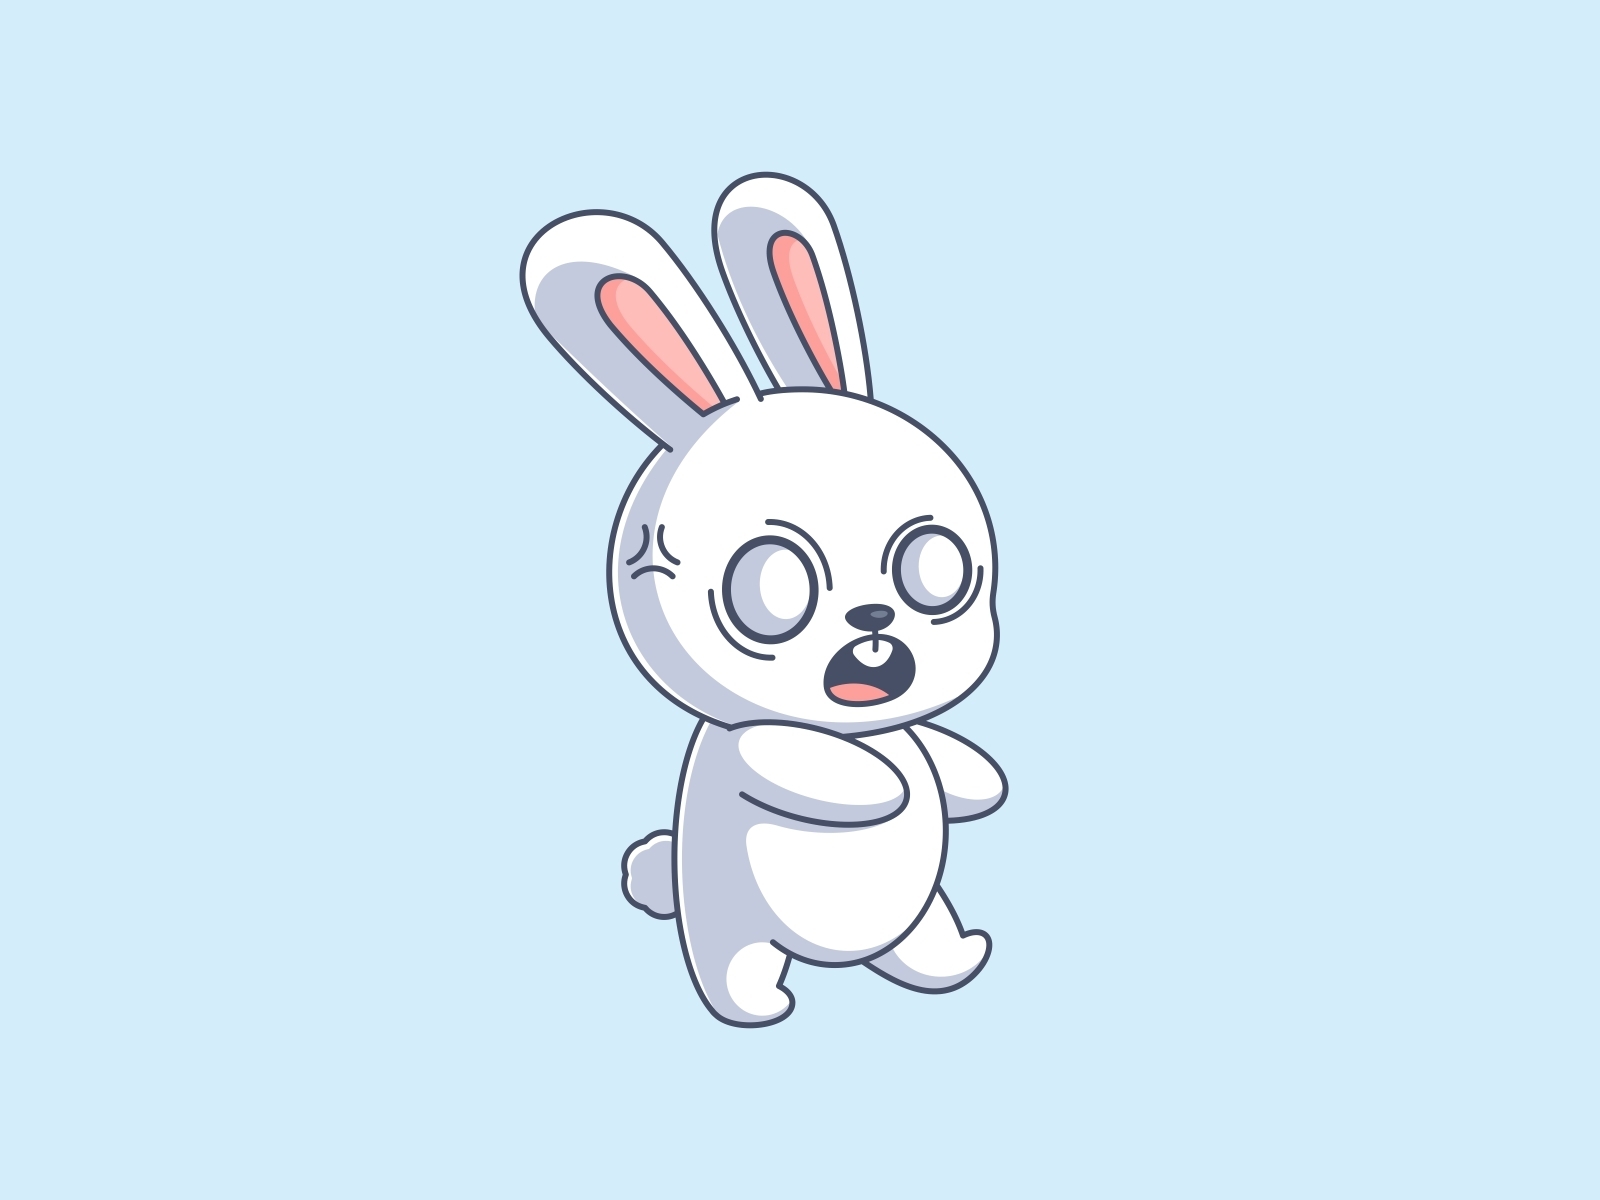 Bunny is angry by wawadzgn on Dribbble